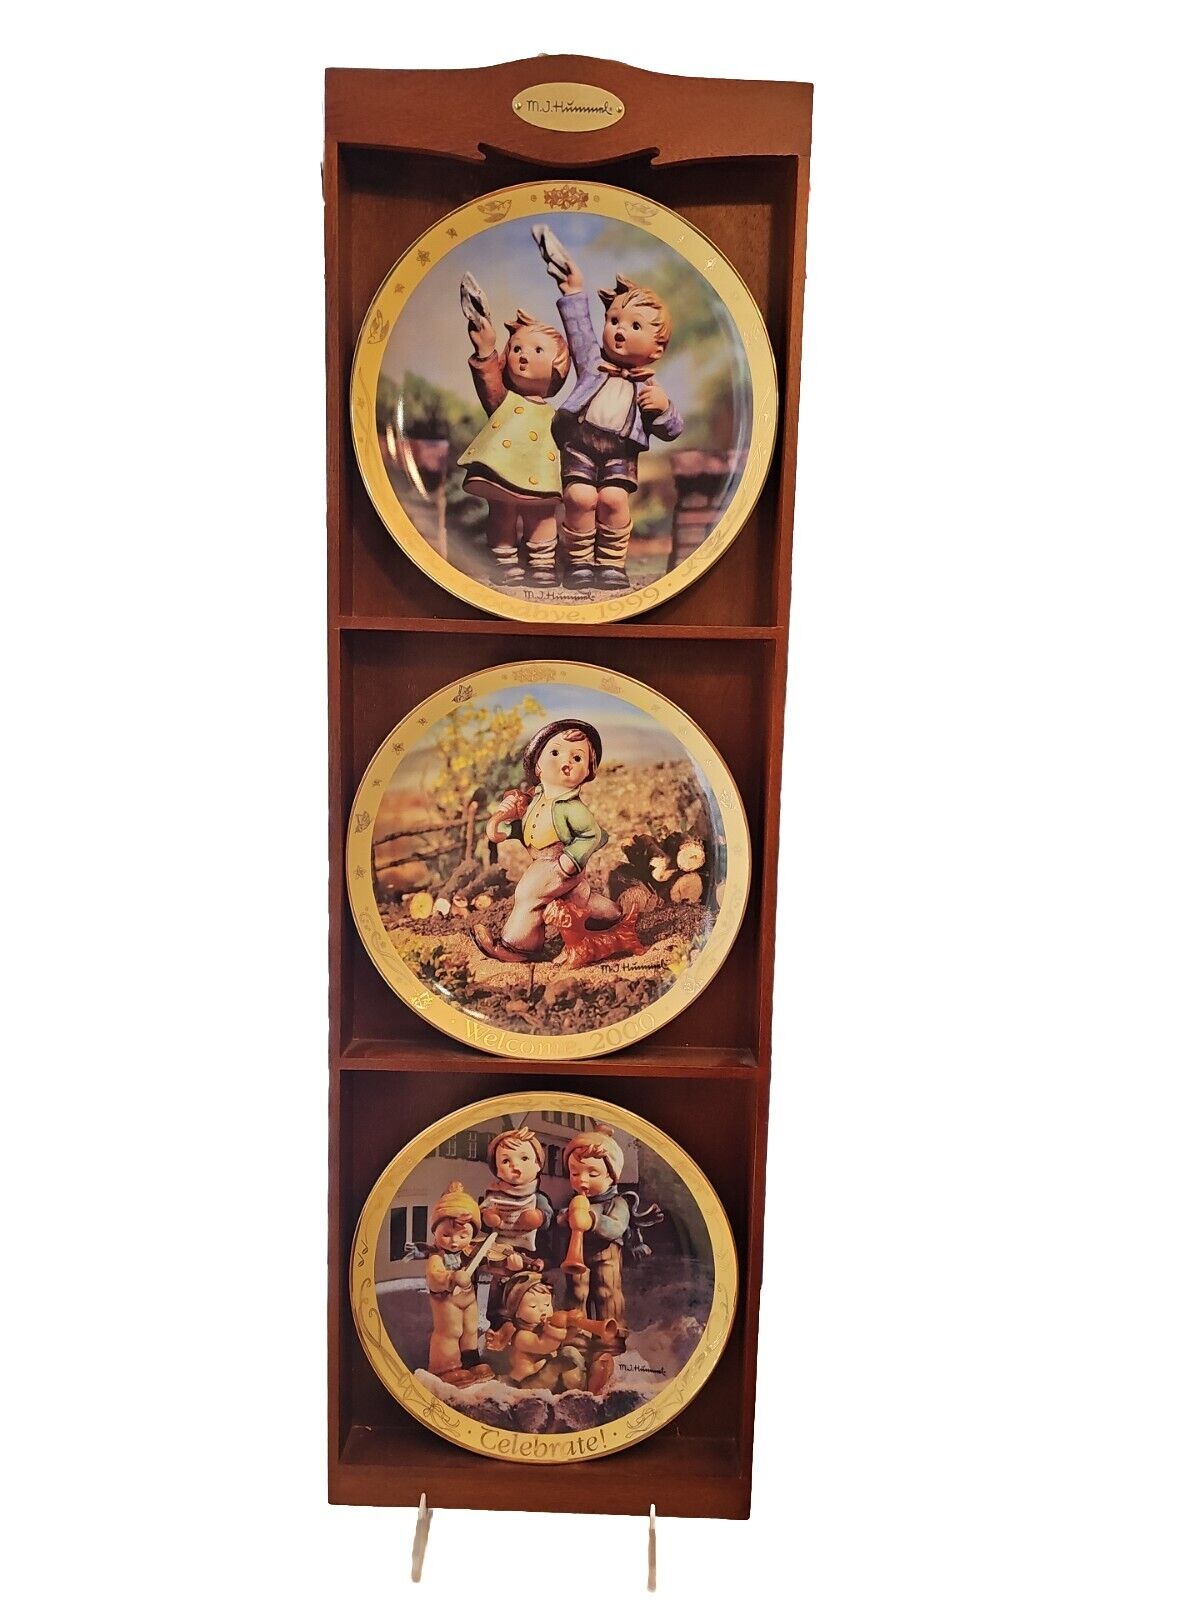 Set 3 Hummel Millennium Plate Collection Goodbye 1999 Welcome 2000 Celebrate 